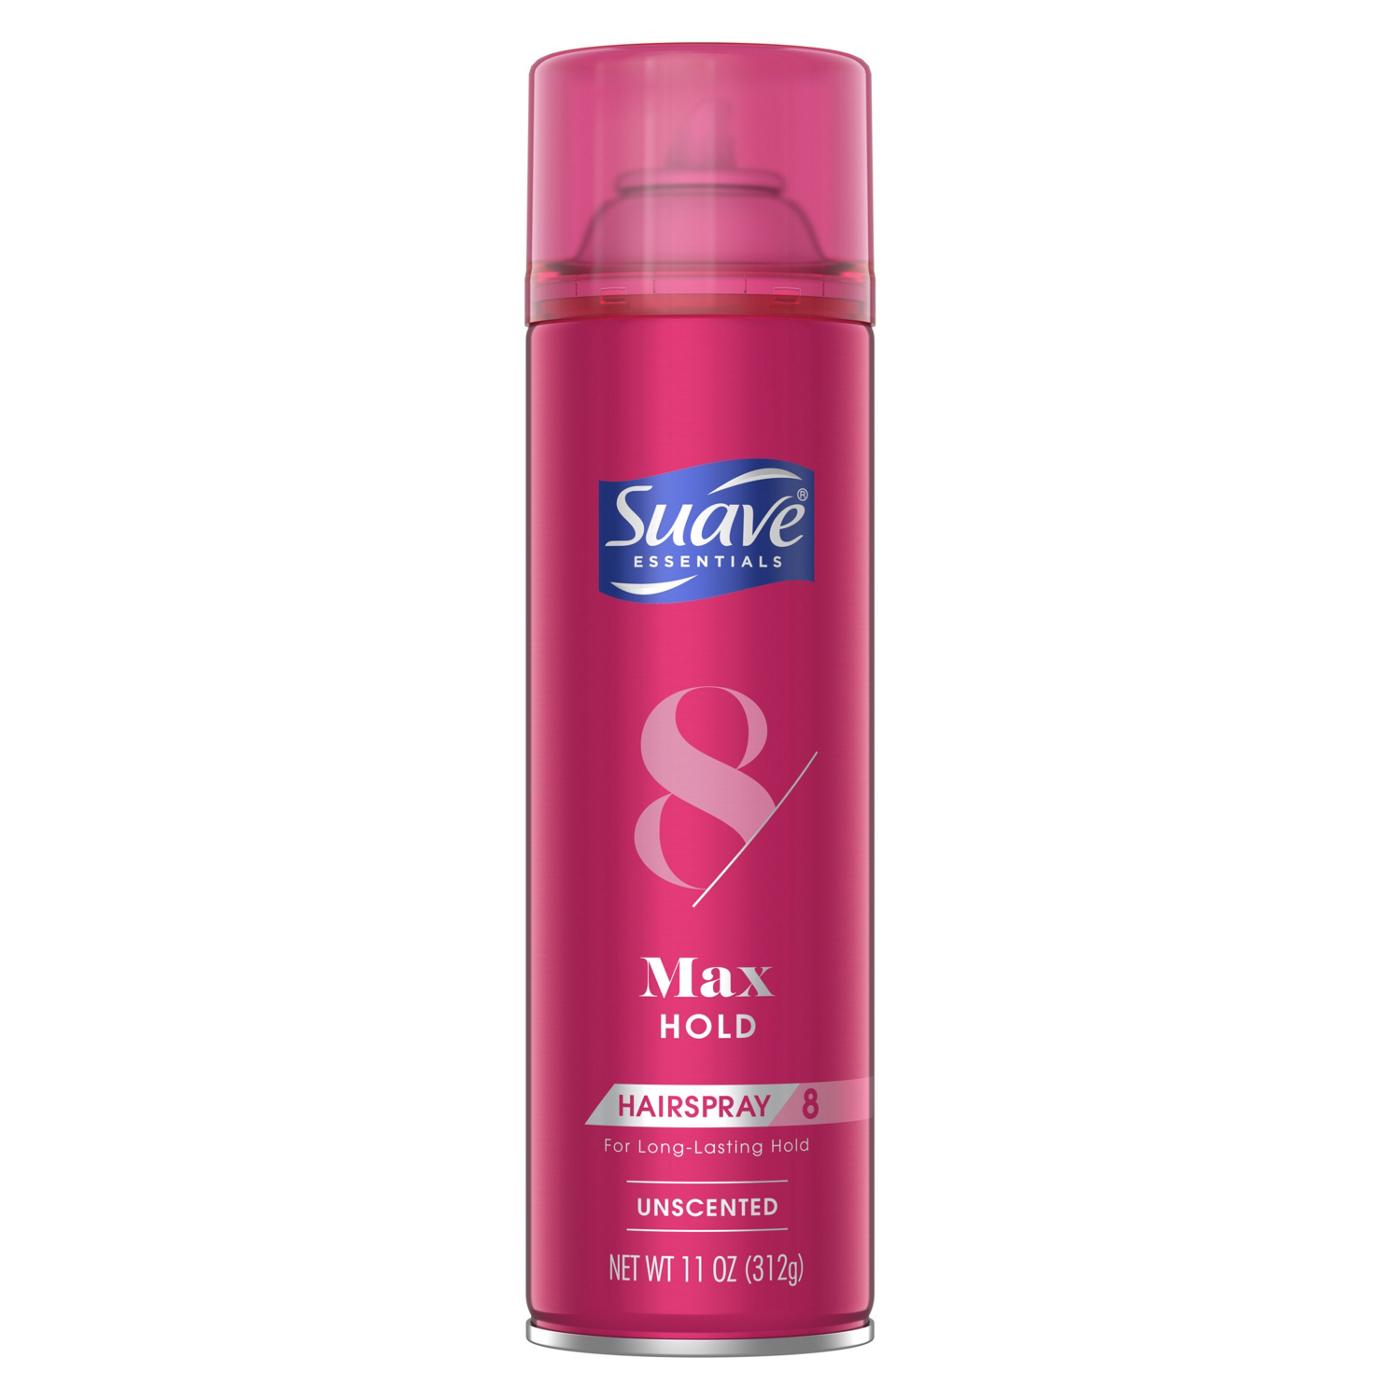 Suave Max Hold Hairspray; image 1 of 3